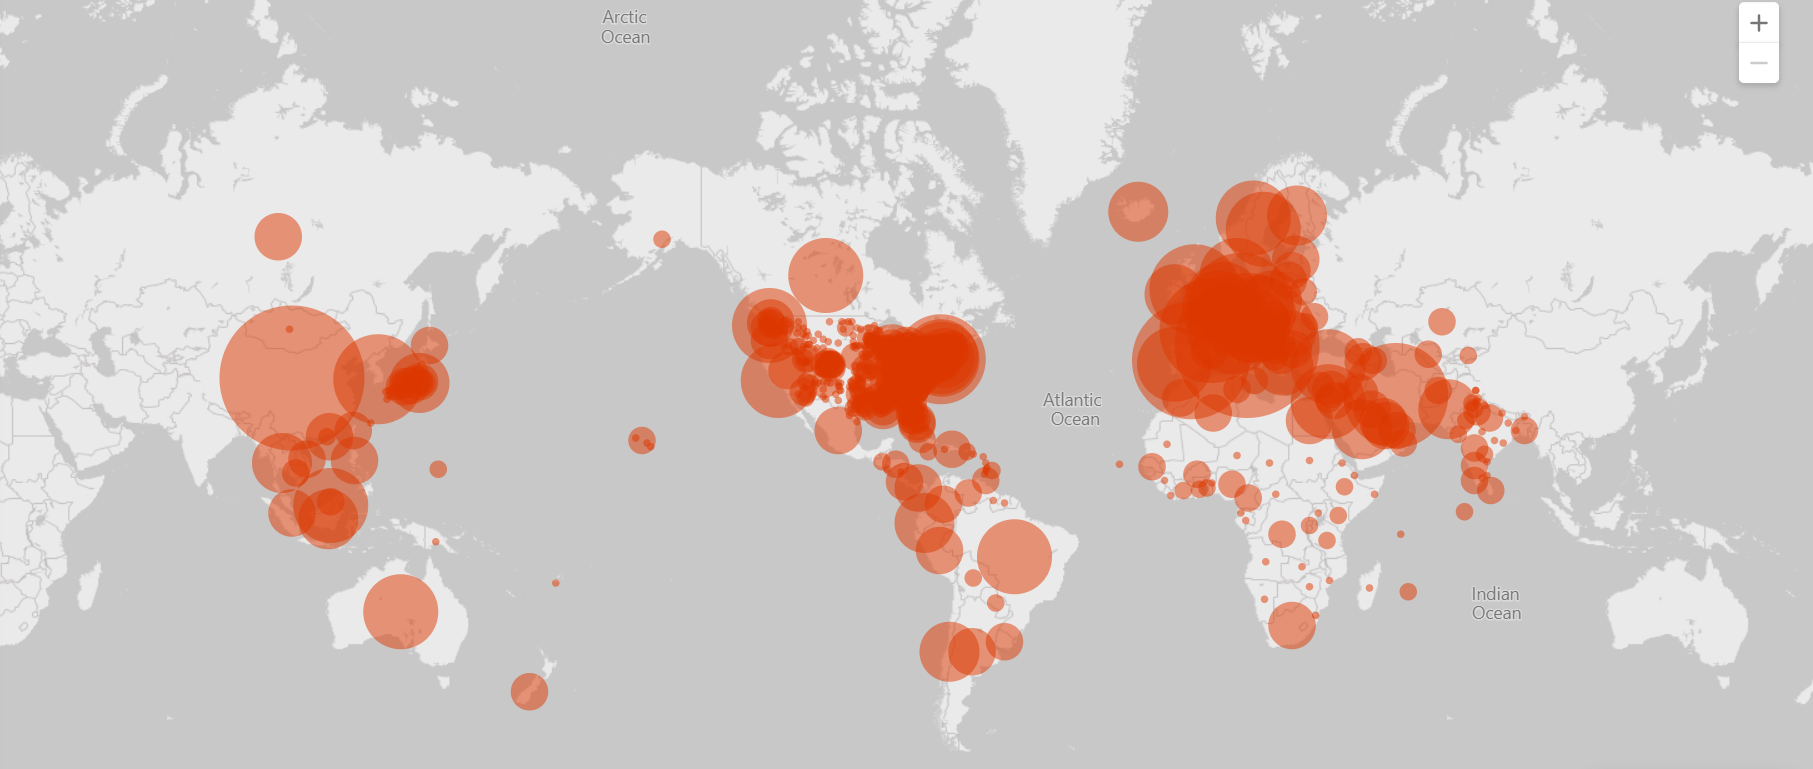 Bing COVID-19 Tracking Site - Shows outbreaks on a world map